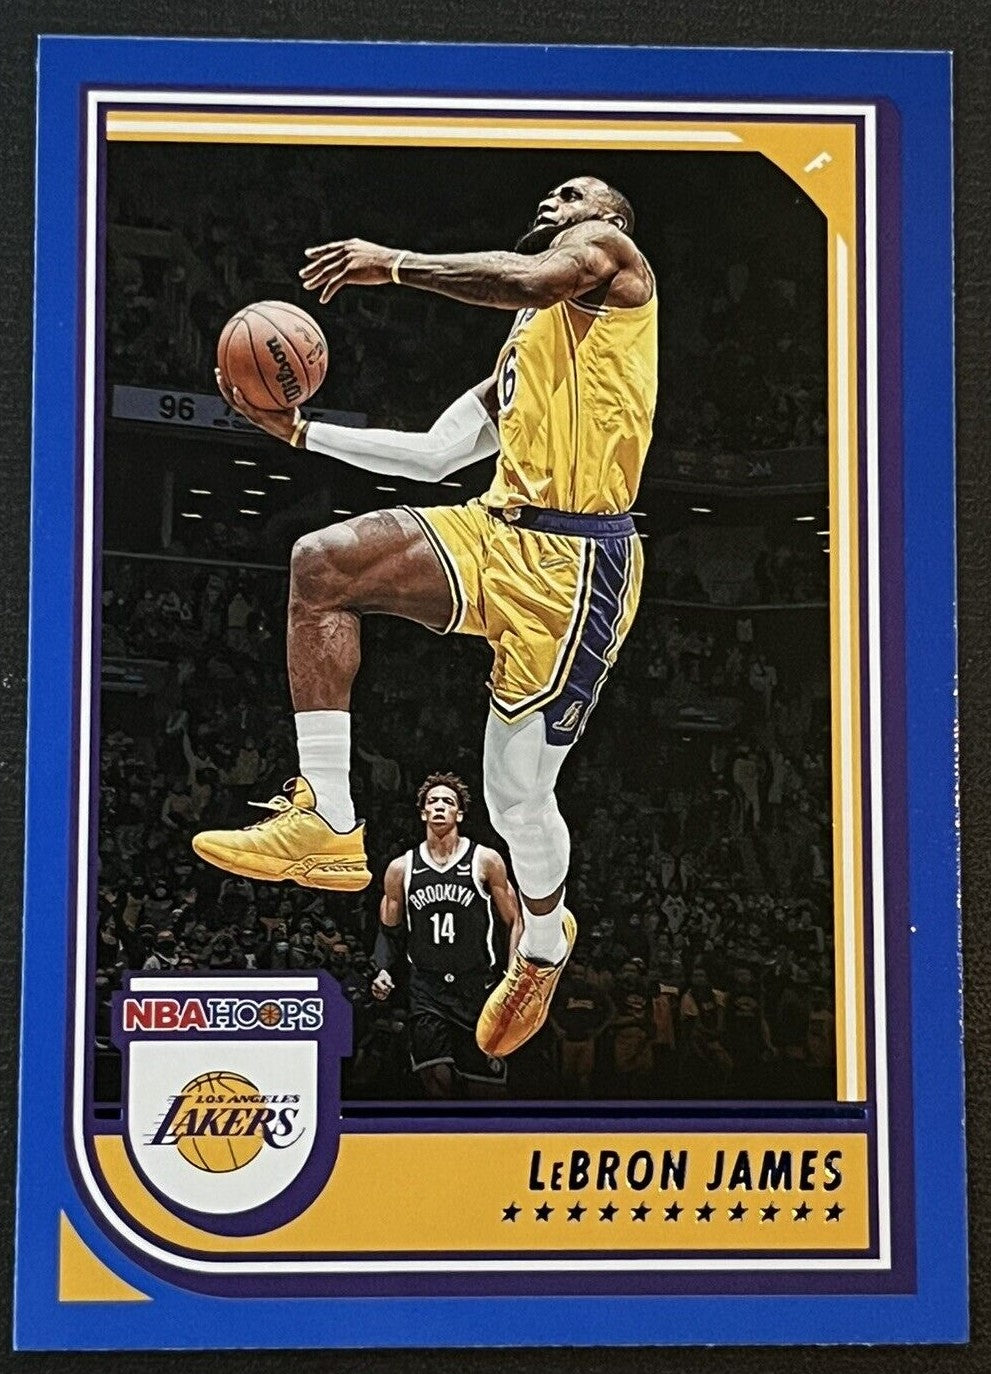 LeBron James 2022 2023 Hoops Series Mint Blue Parallel Version of Card #170